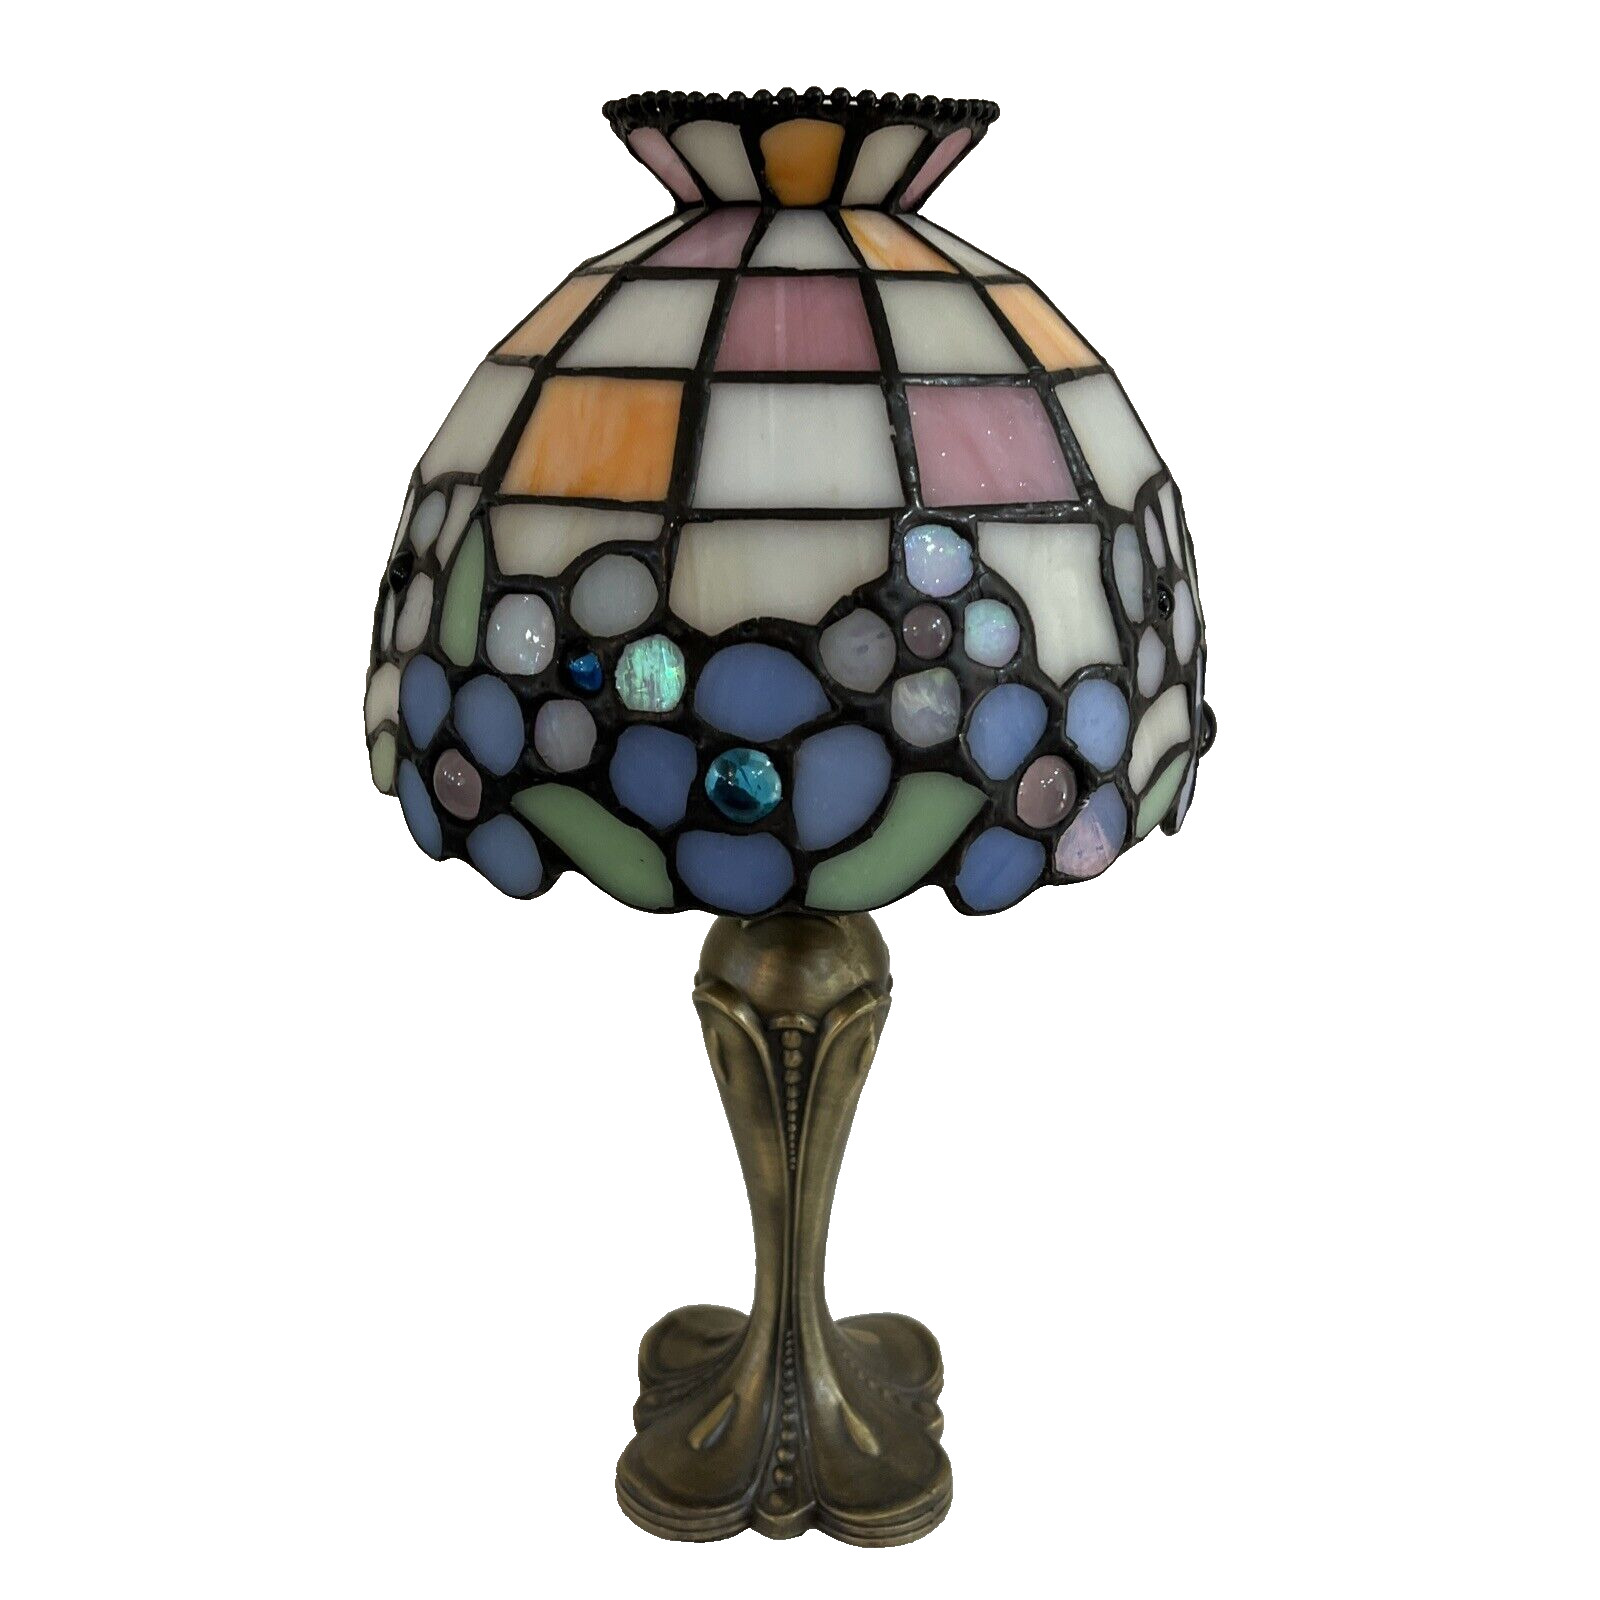 PartyLite HYDRANGEA TIFFANY STYLE Stained Glass TEA LIGHT LAMP Candle Holder MOM